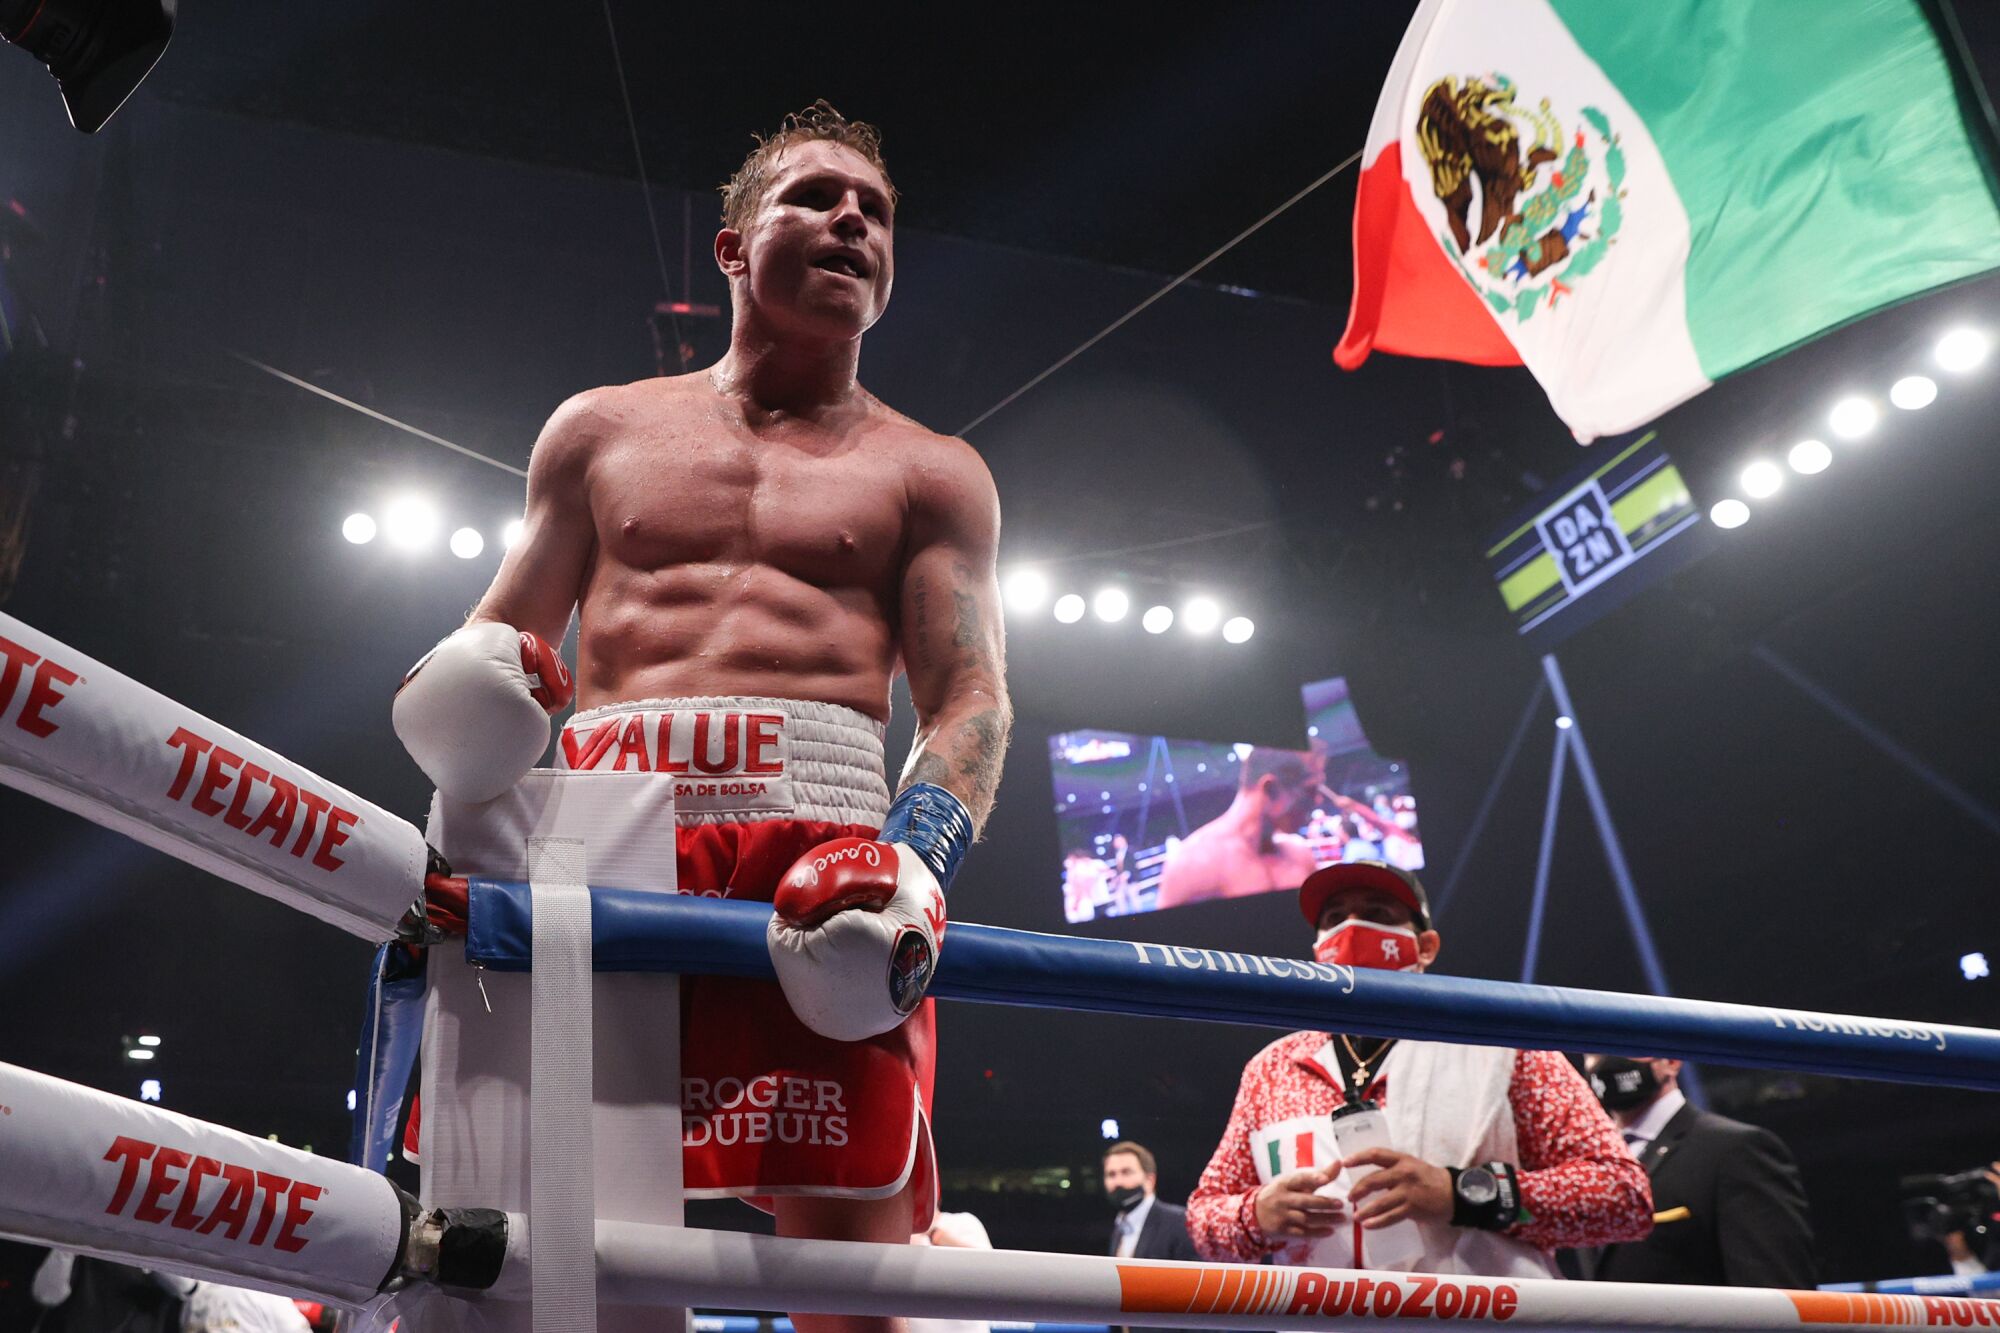 Canelo Alvarez celebrates after defeating Callum Smith by unanimous decision in a championship title fight.